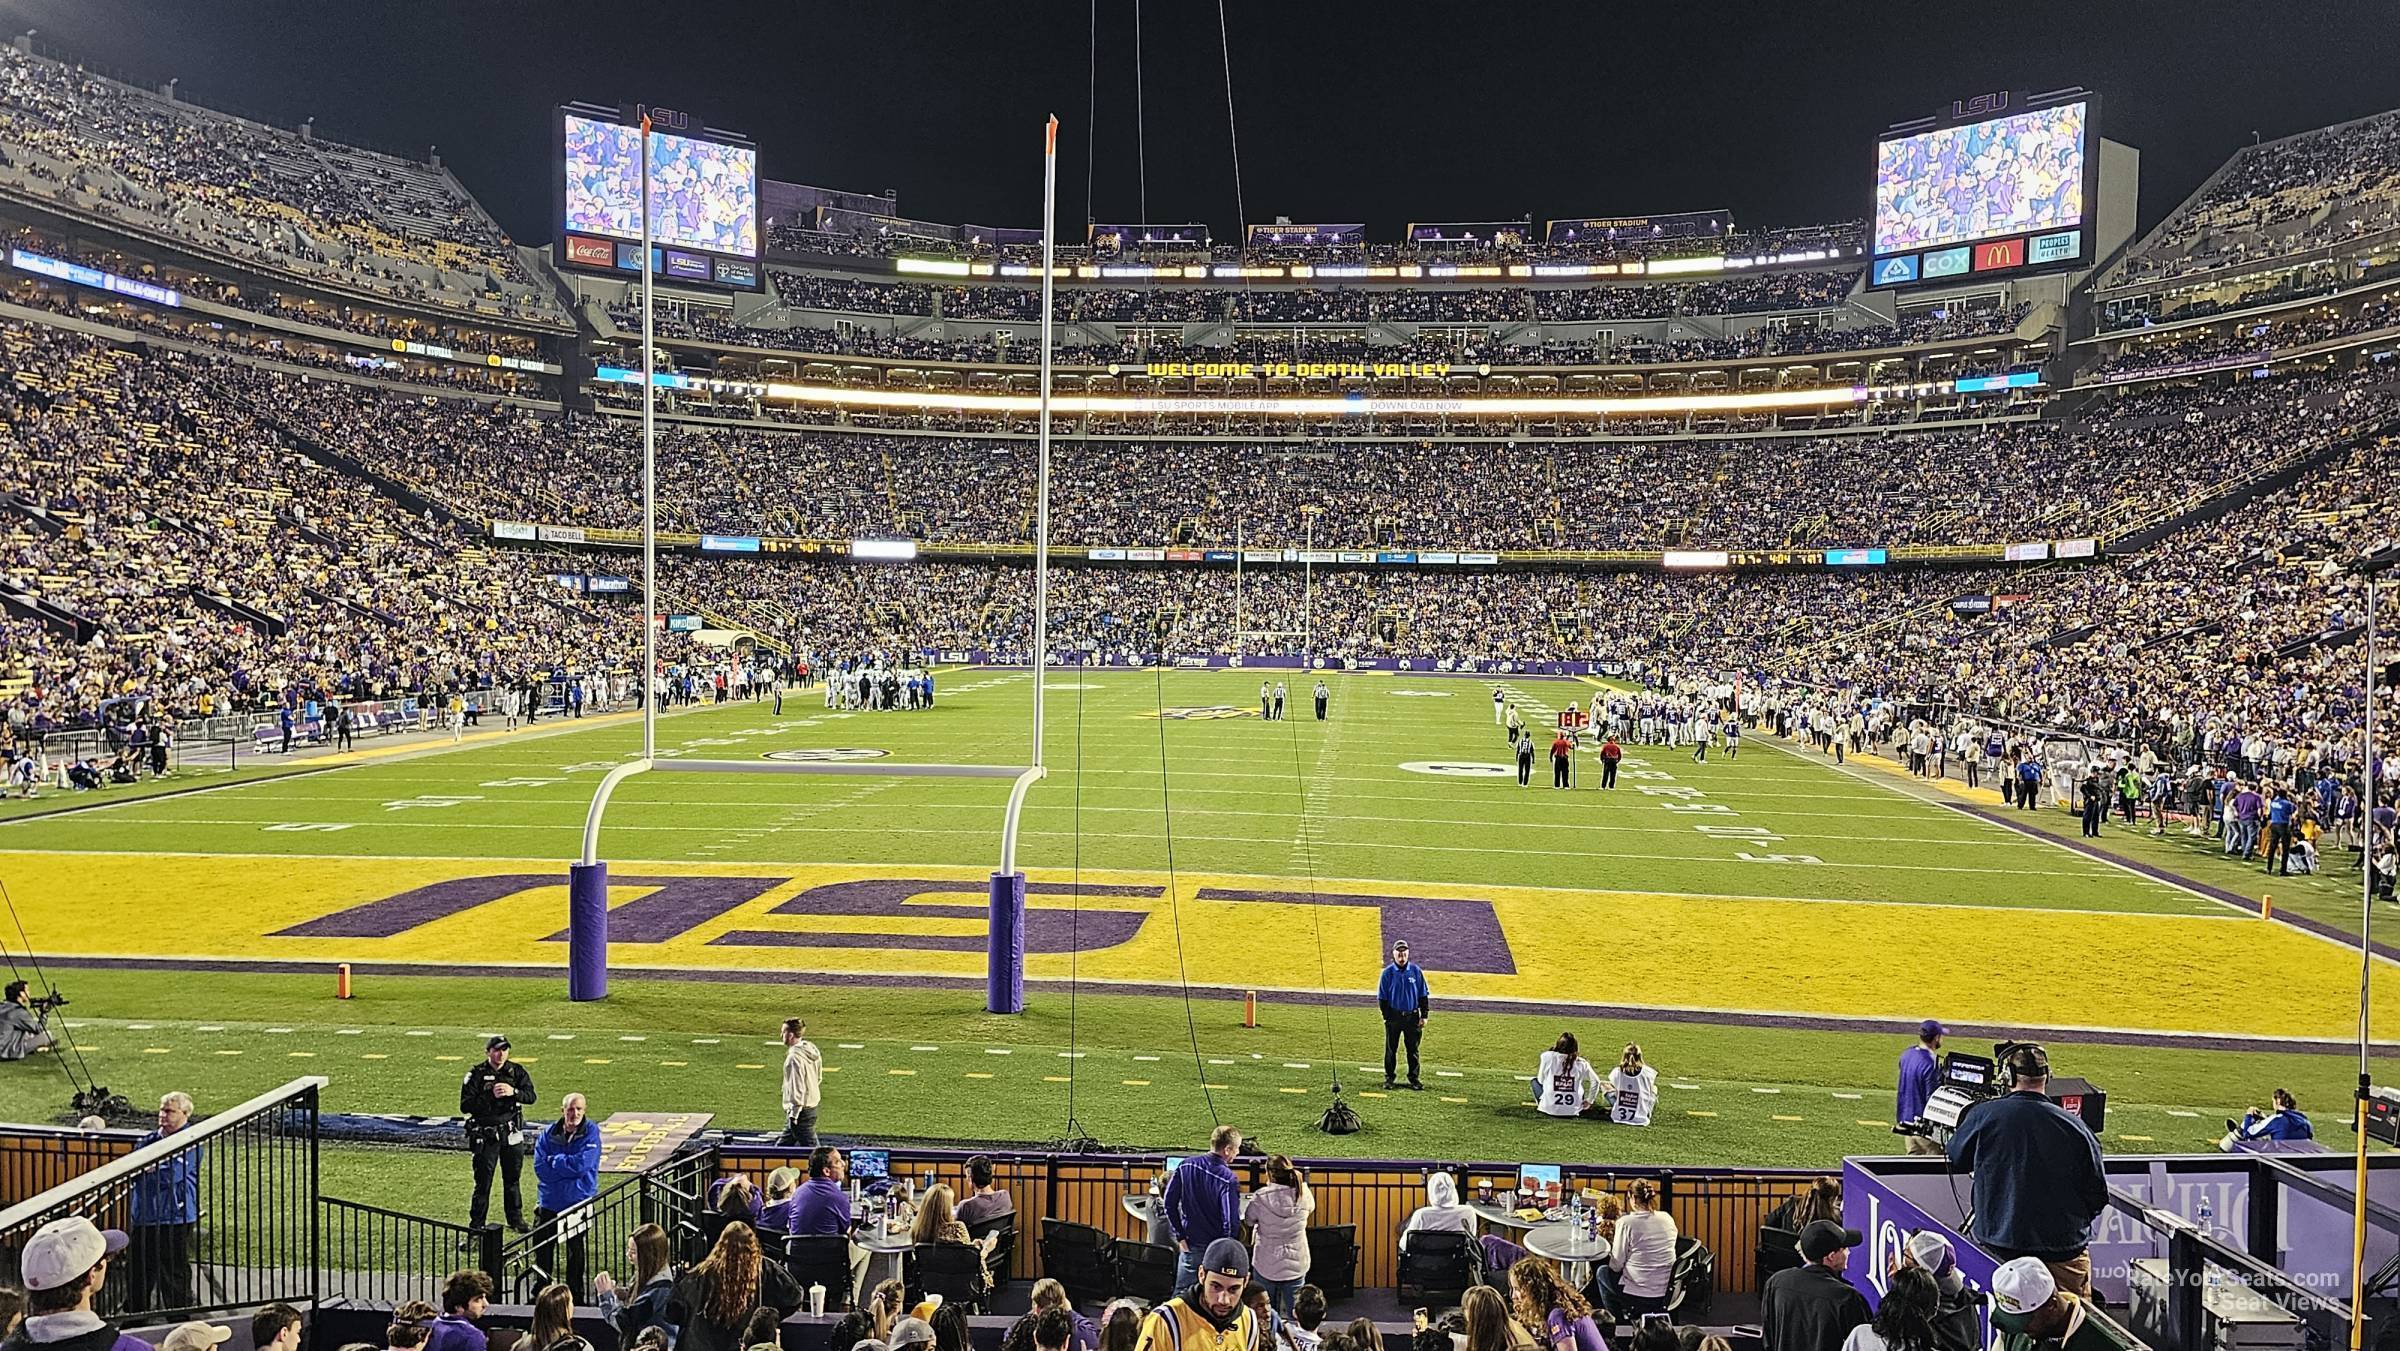 section 205, row 13 seat view  - tiger stadium